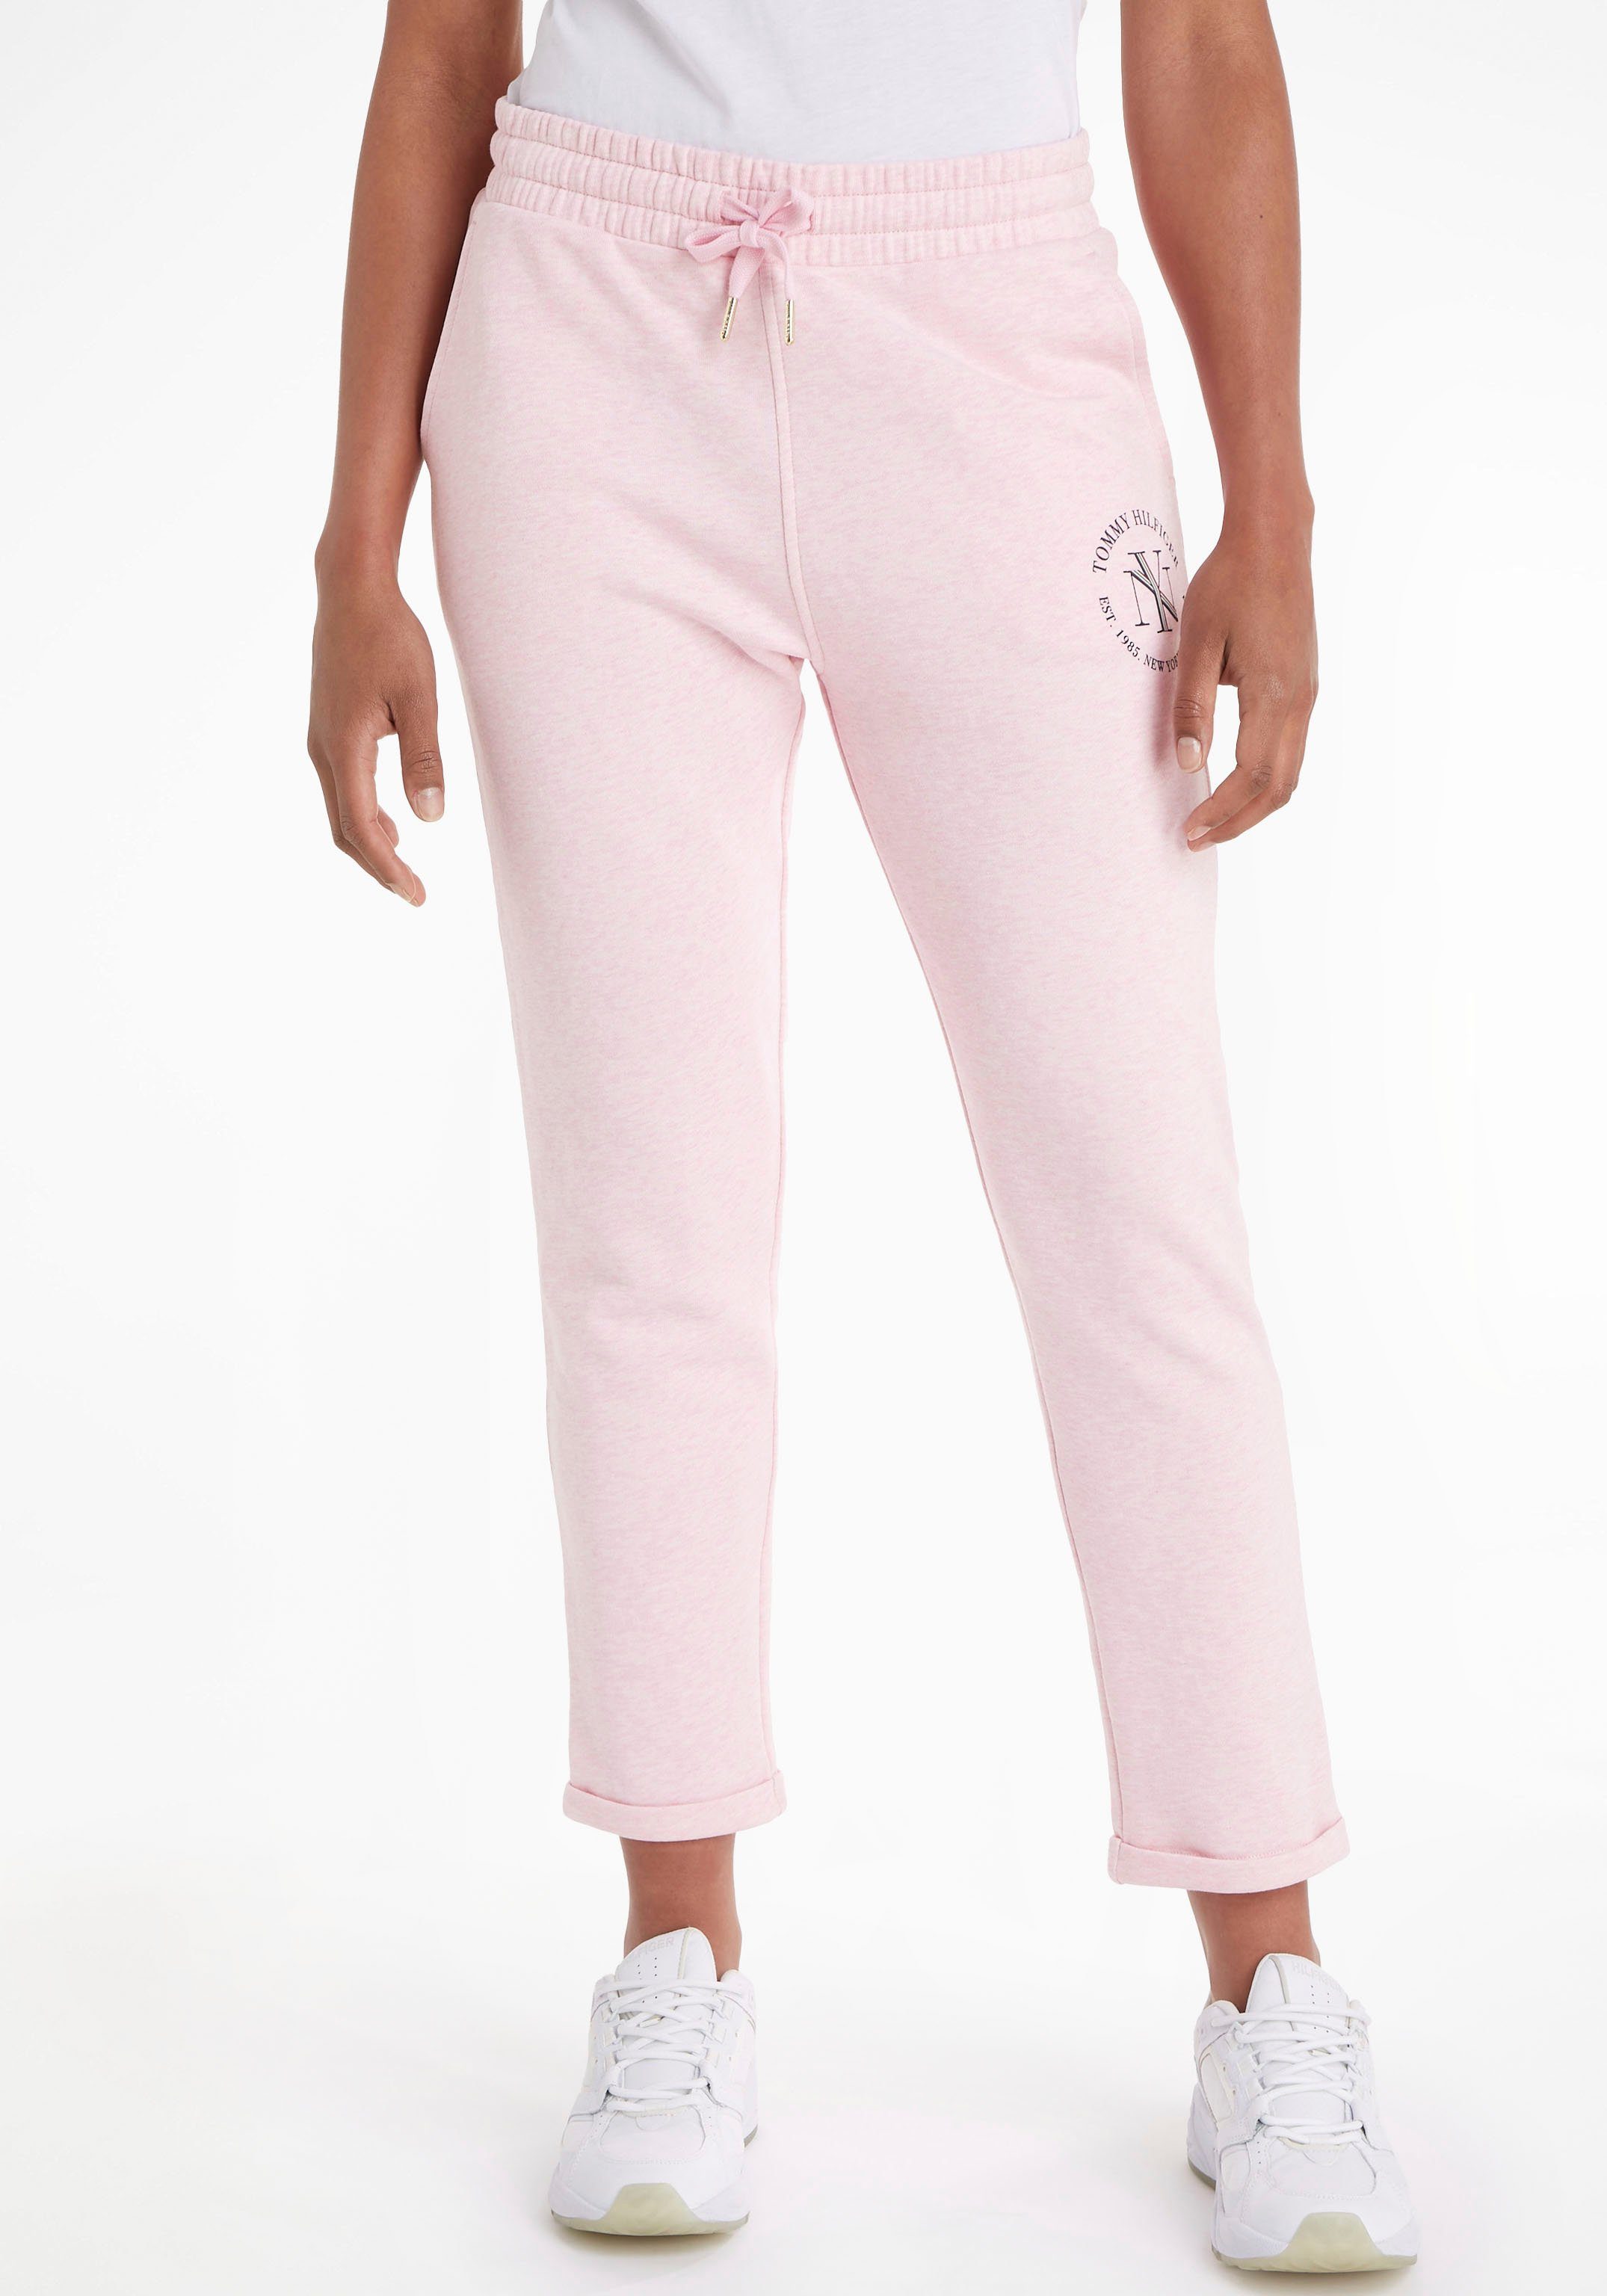 Tommy Hilfiger Sweatpants TAPERED NYC ROUNDALL SWEATPANTS mit Tommy Hilfiger Markenlabel Classic-Pink-Heather | Jogginghosen